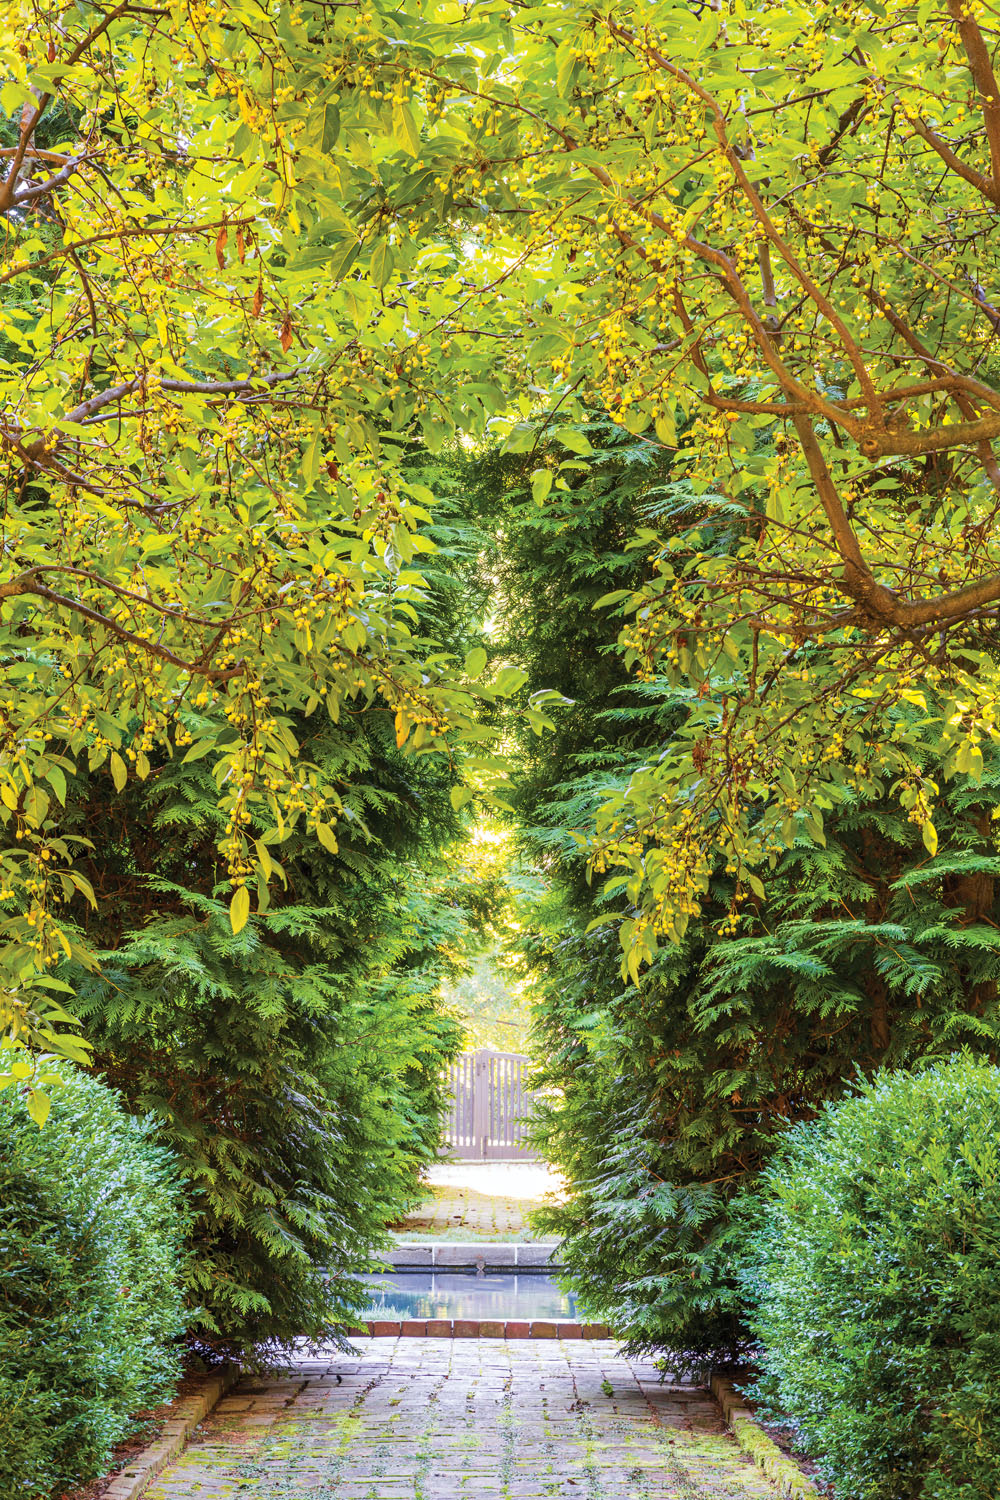 brick path through the gardens at Krisheim, landscape design by Fred Dawson of Olmsted Brothers